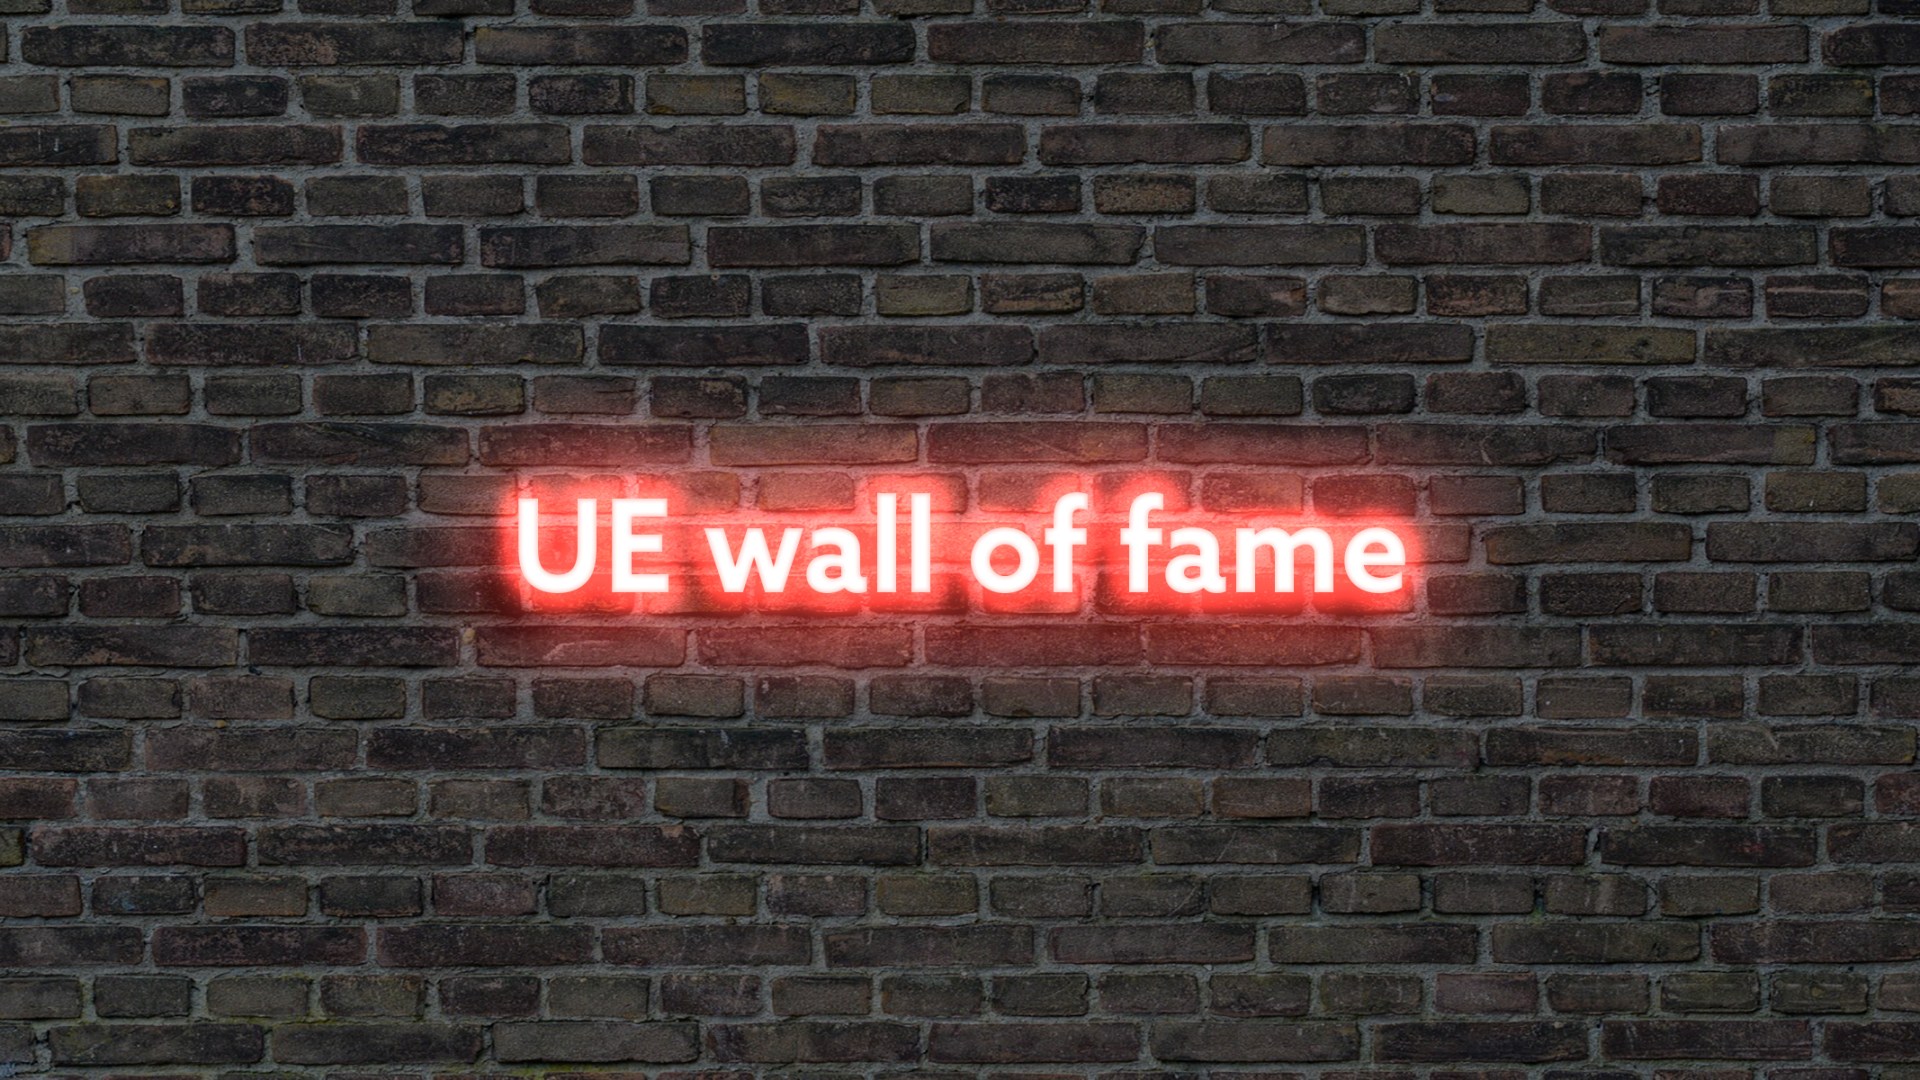 UE wall of fame